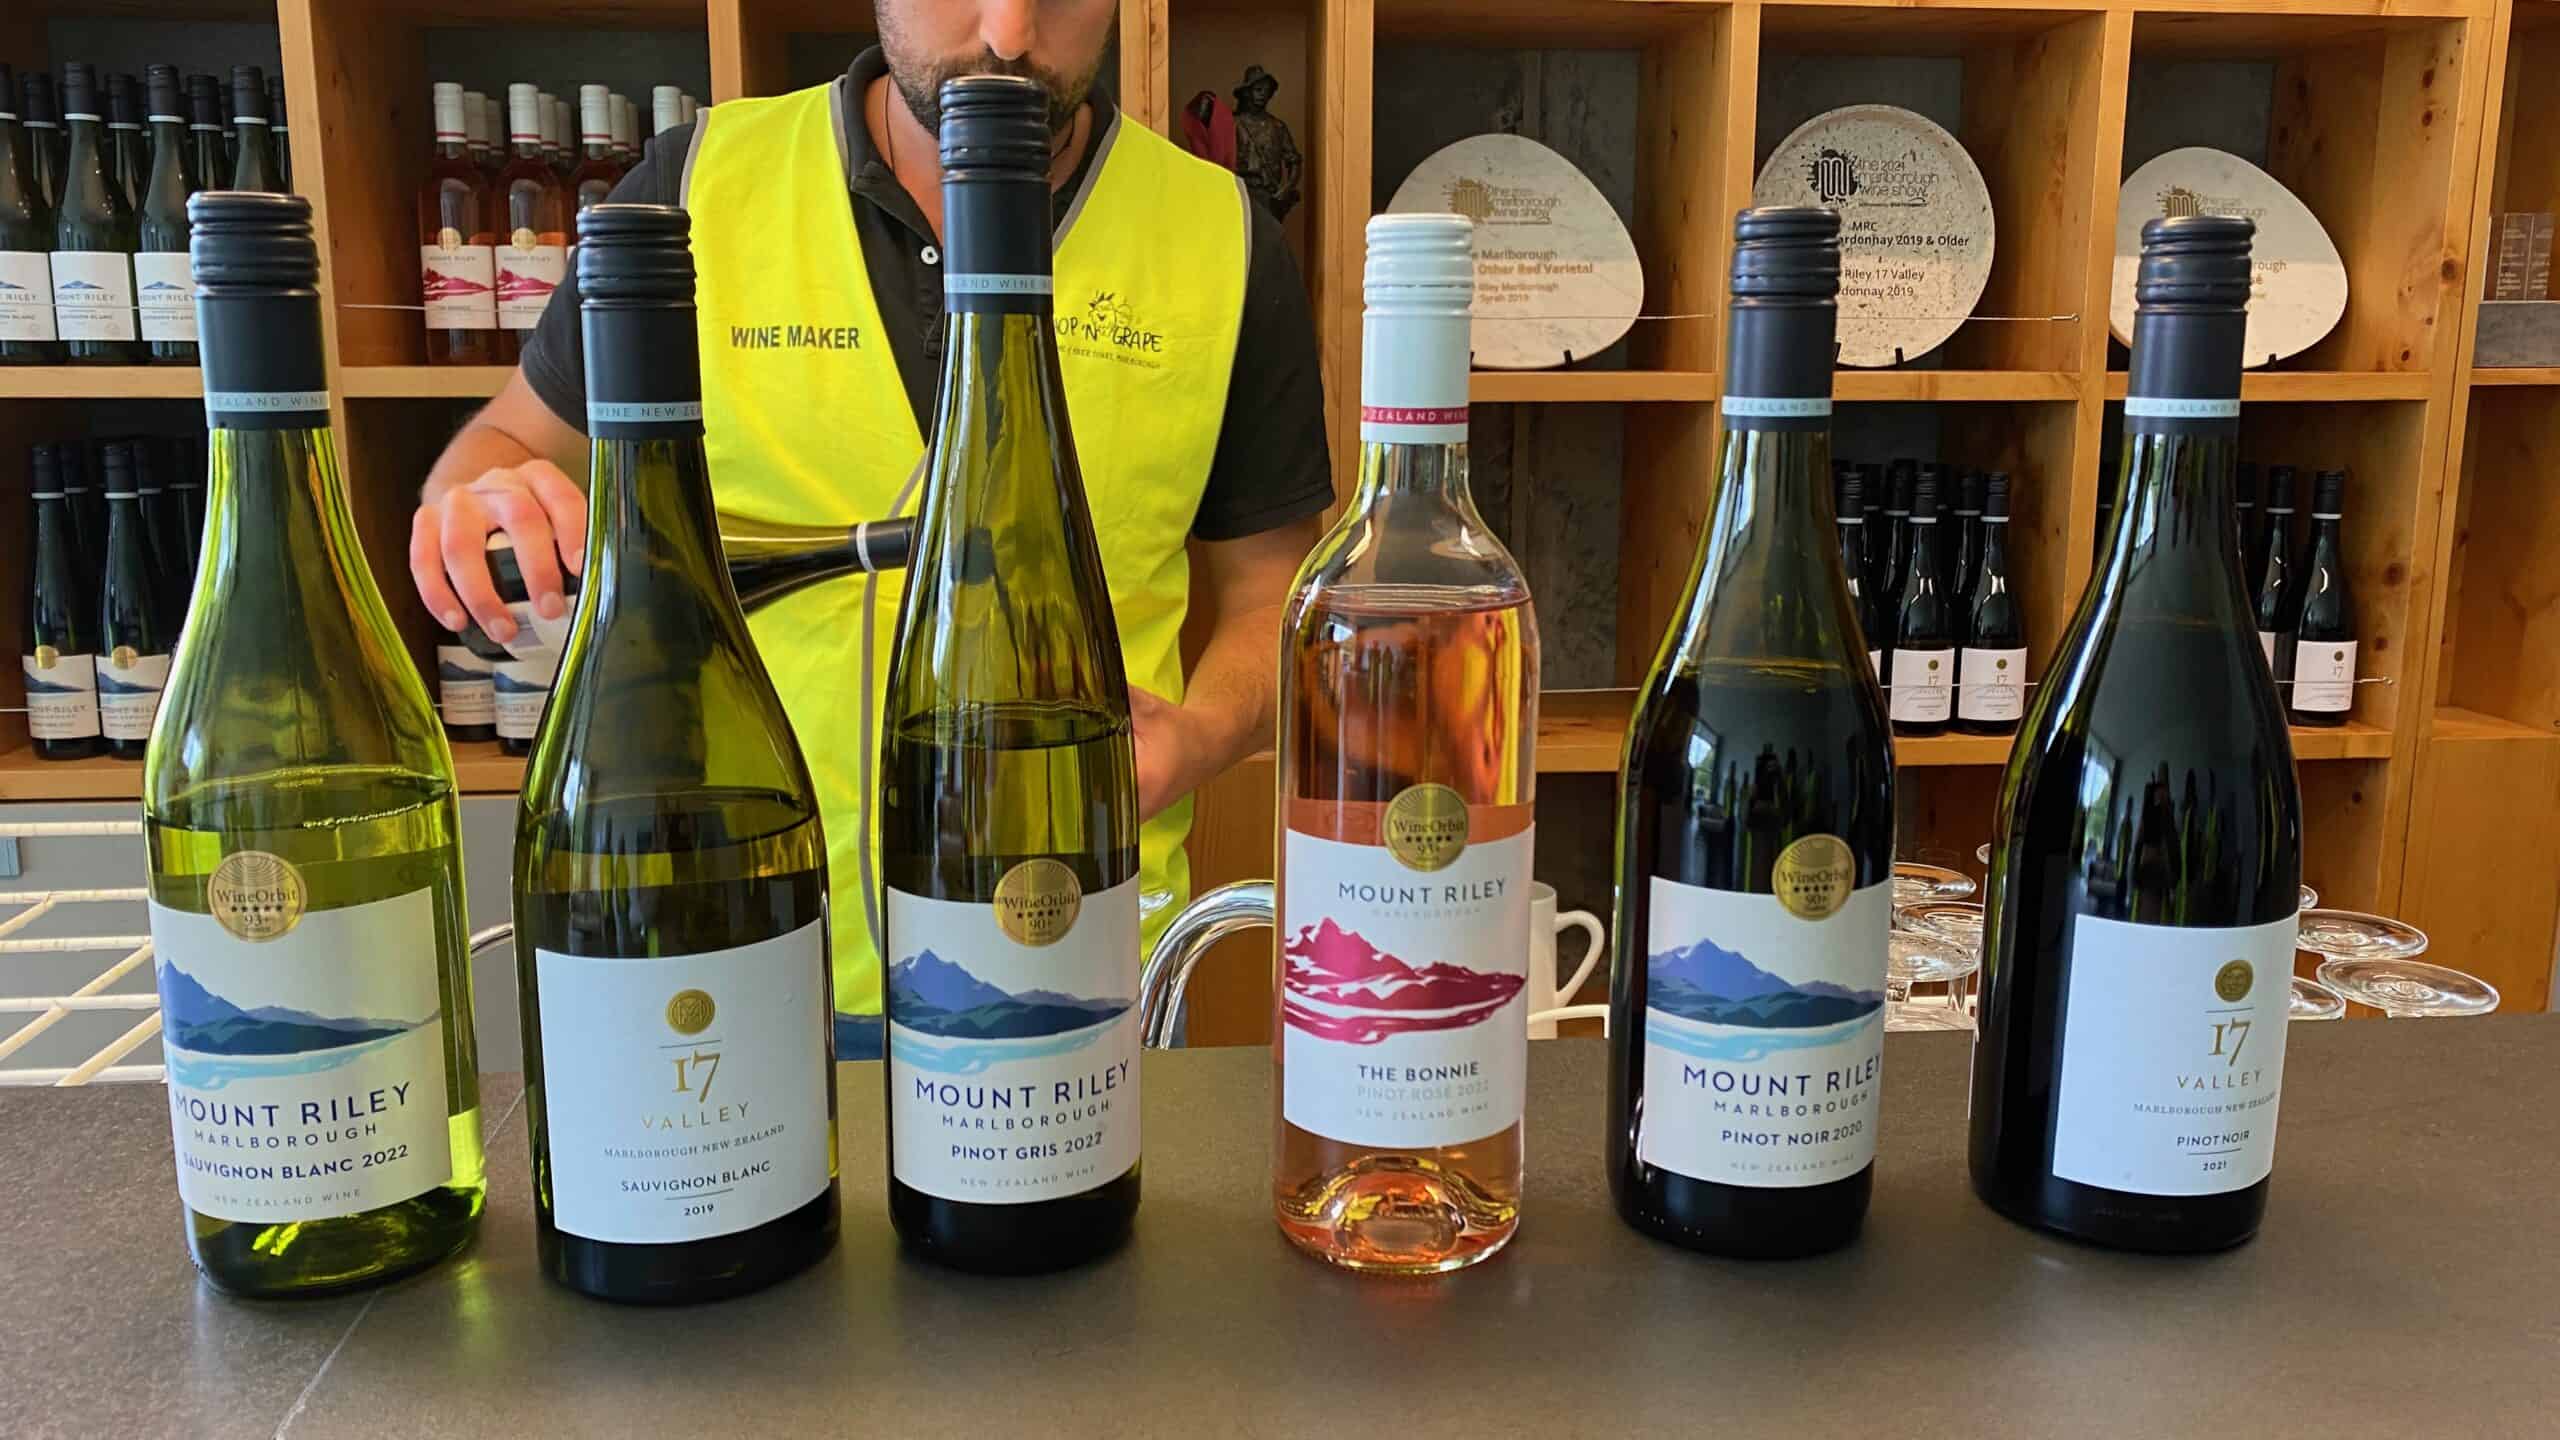 Wines on offer at Mount Riley